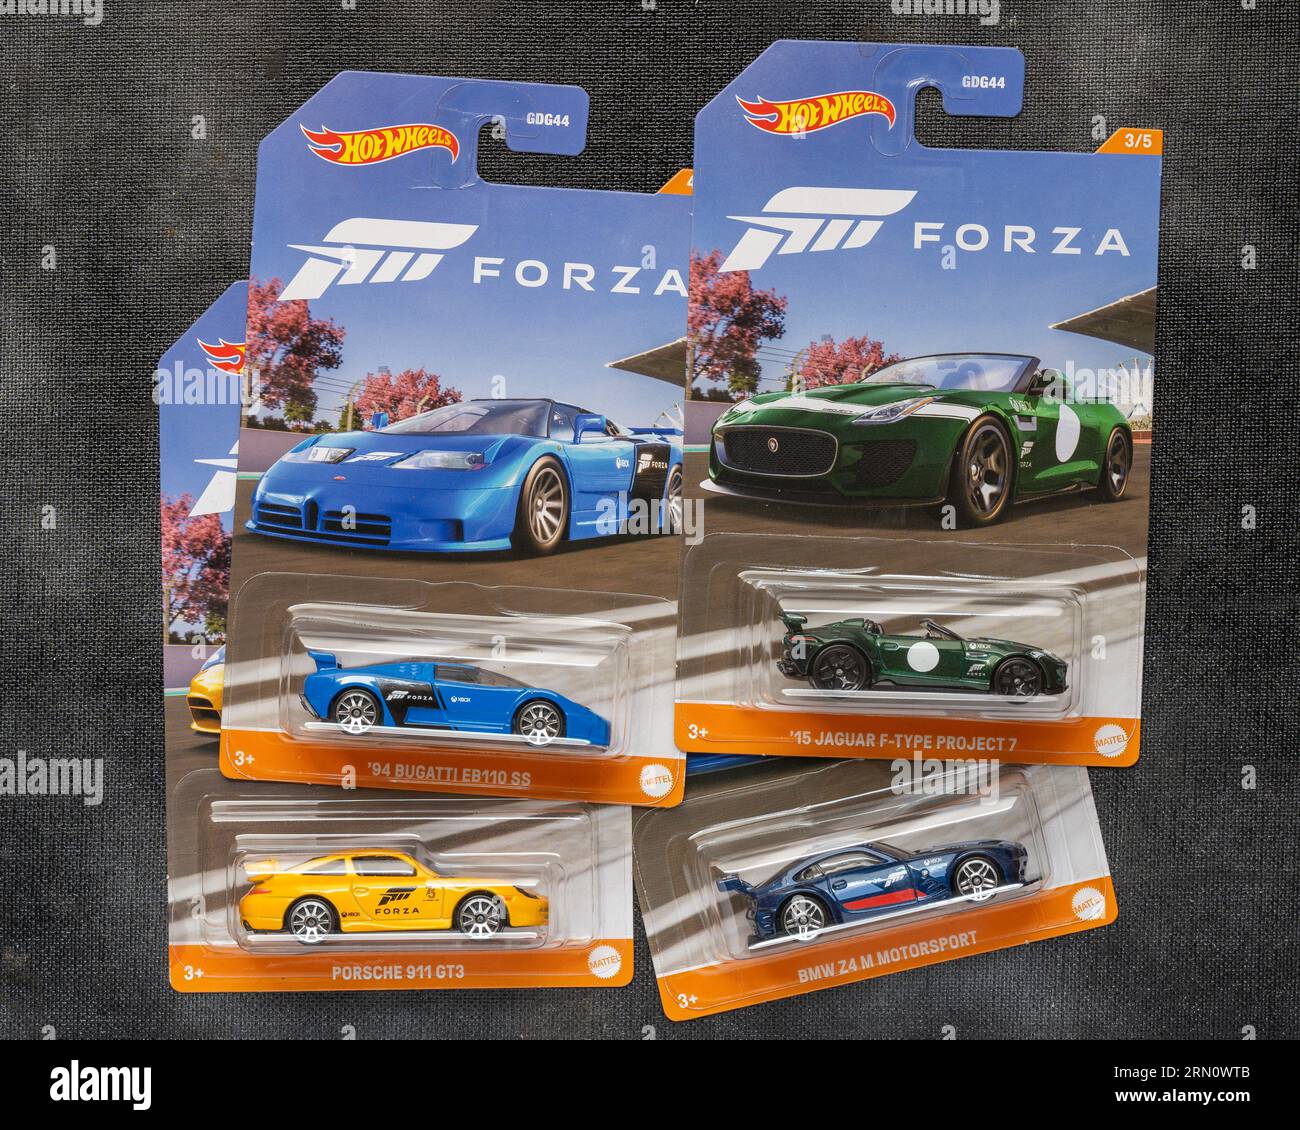 Doha, Qatar - August 17, 2023: Assortment of Hot Wheels die cast carded car model for Hot Wheels series. Hot Wheels is a scale die-cast toy cars by Am Stock Photo